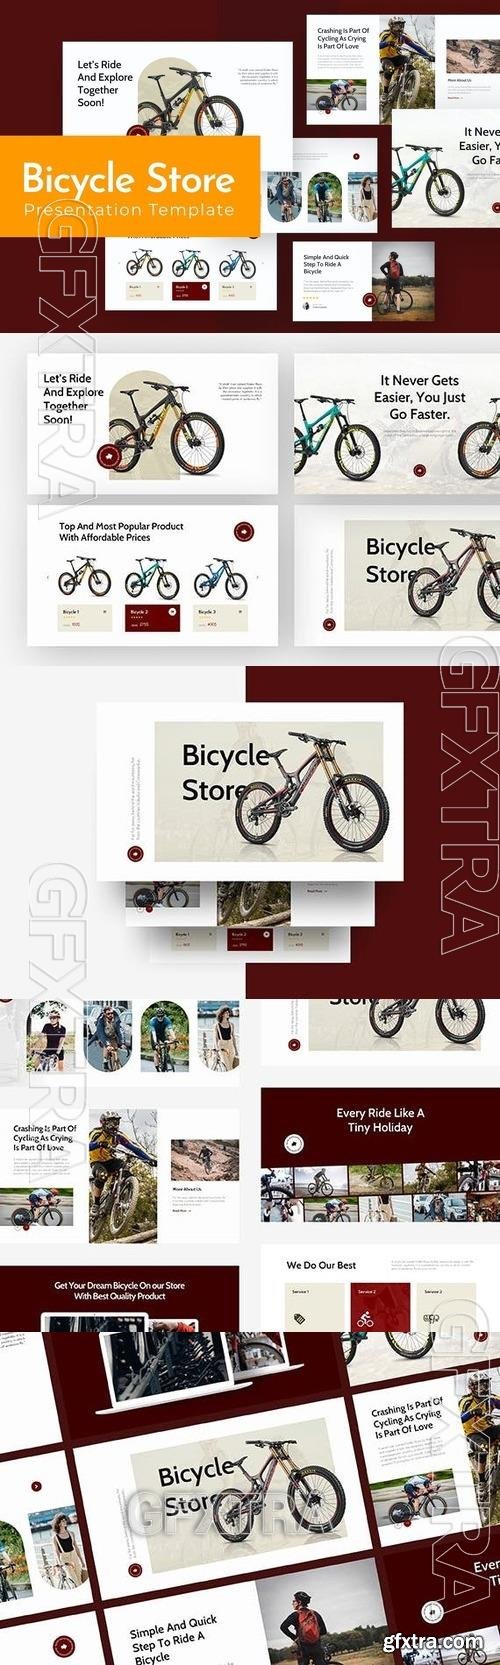 Bicycle Store Powerpoint Template Q8QSRXY